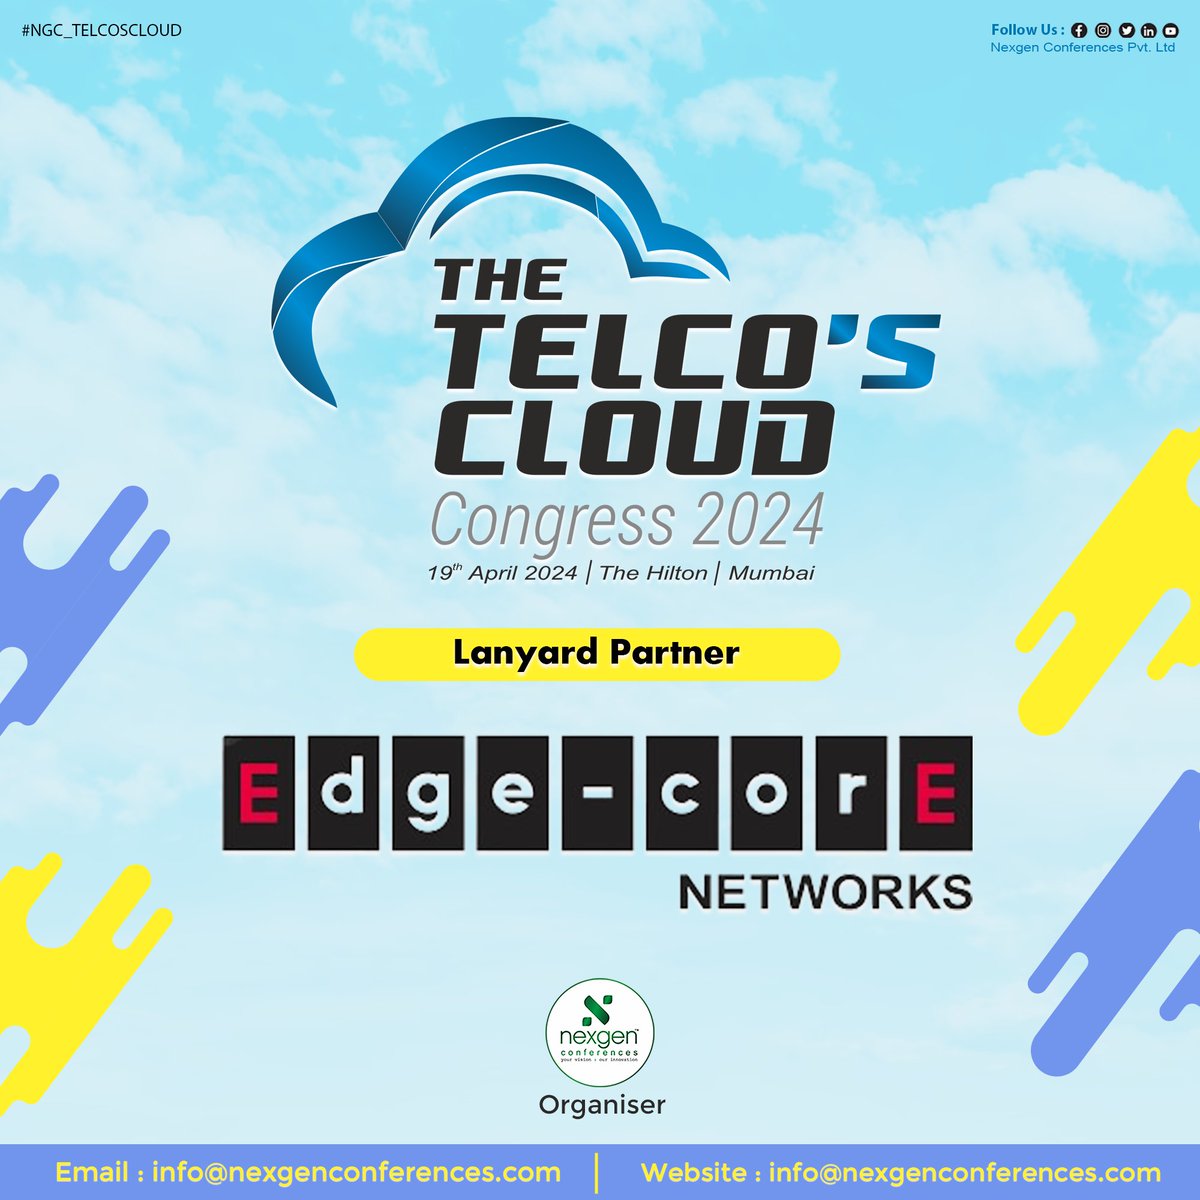 We're thrilled announce that @EdgecoreNetwork has joined us as the Lanyard Partner for The Telco's Cloud Congress 2024, on April 19th, 2024 @ The Hilton Mumbai
Conference Timings: 12:00 PM - 07:30 PM (Followed by Cocktails & Dinner)
url : nexgenconferences.com/telcoscloud/
#NGC_TELCOSCLOUD